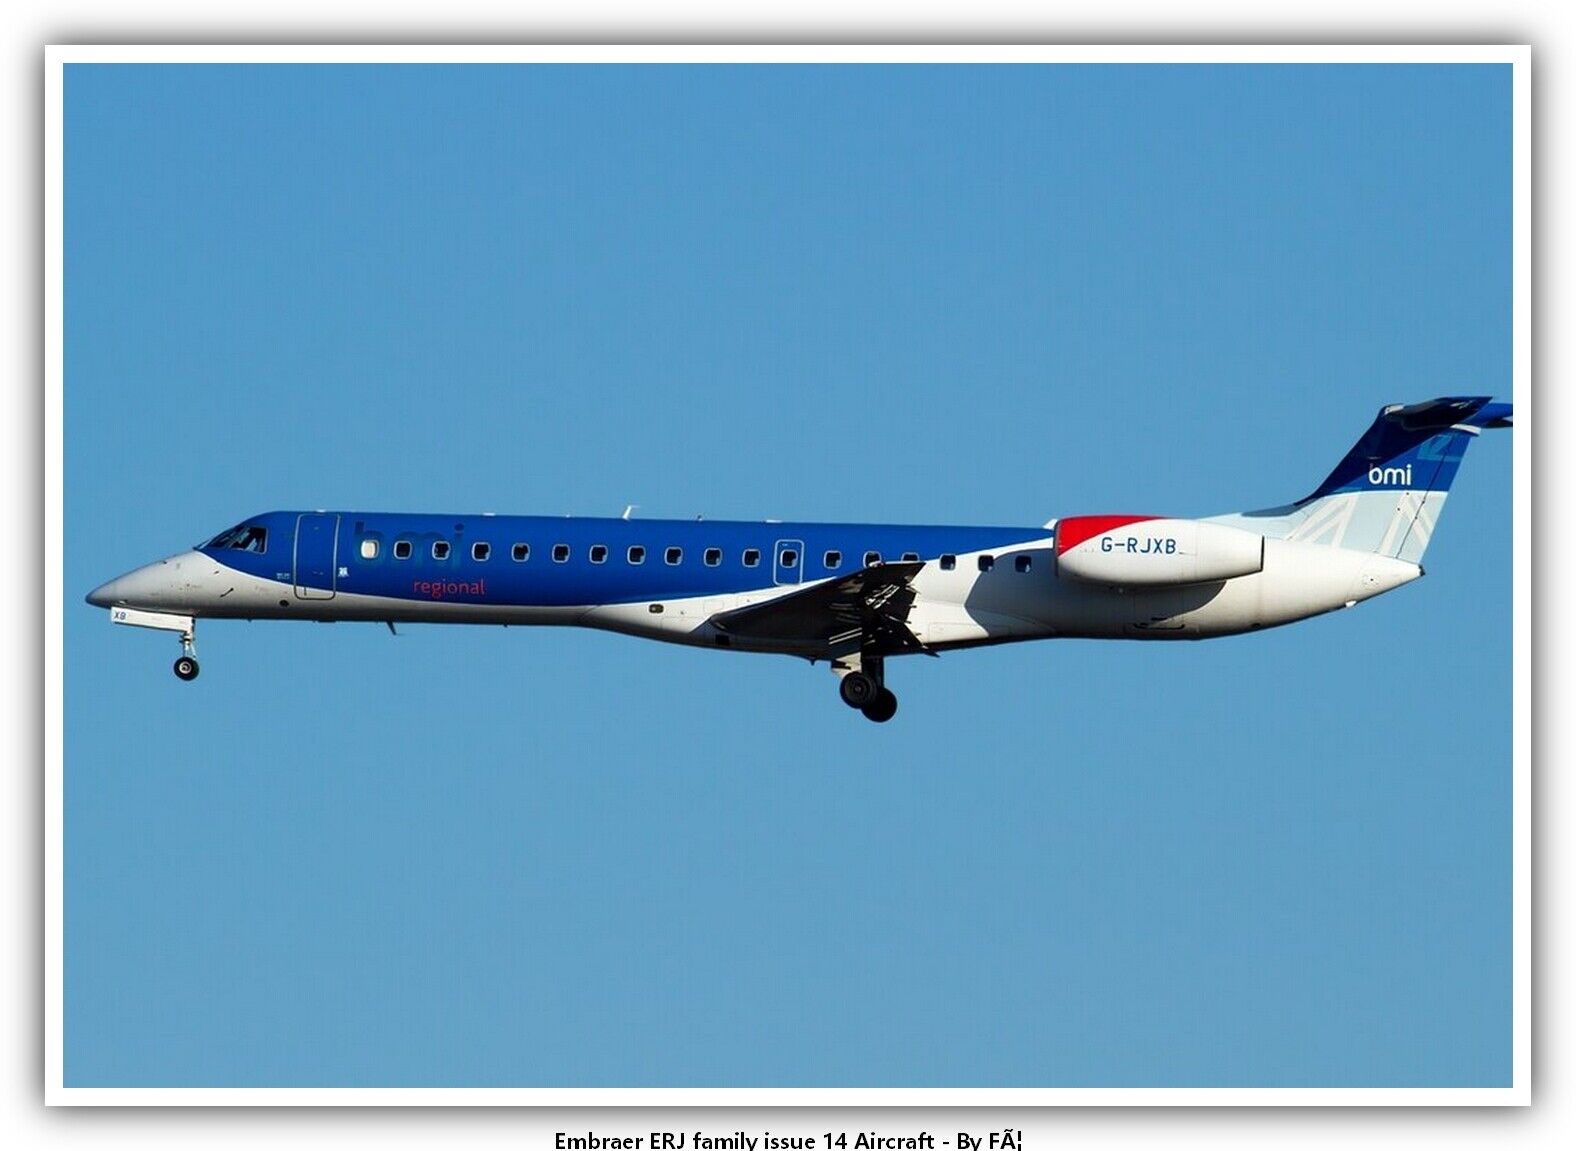 Embraer ERJ family issue 14 Aircraft